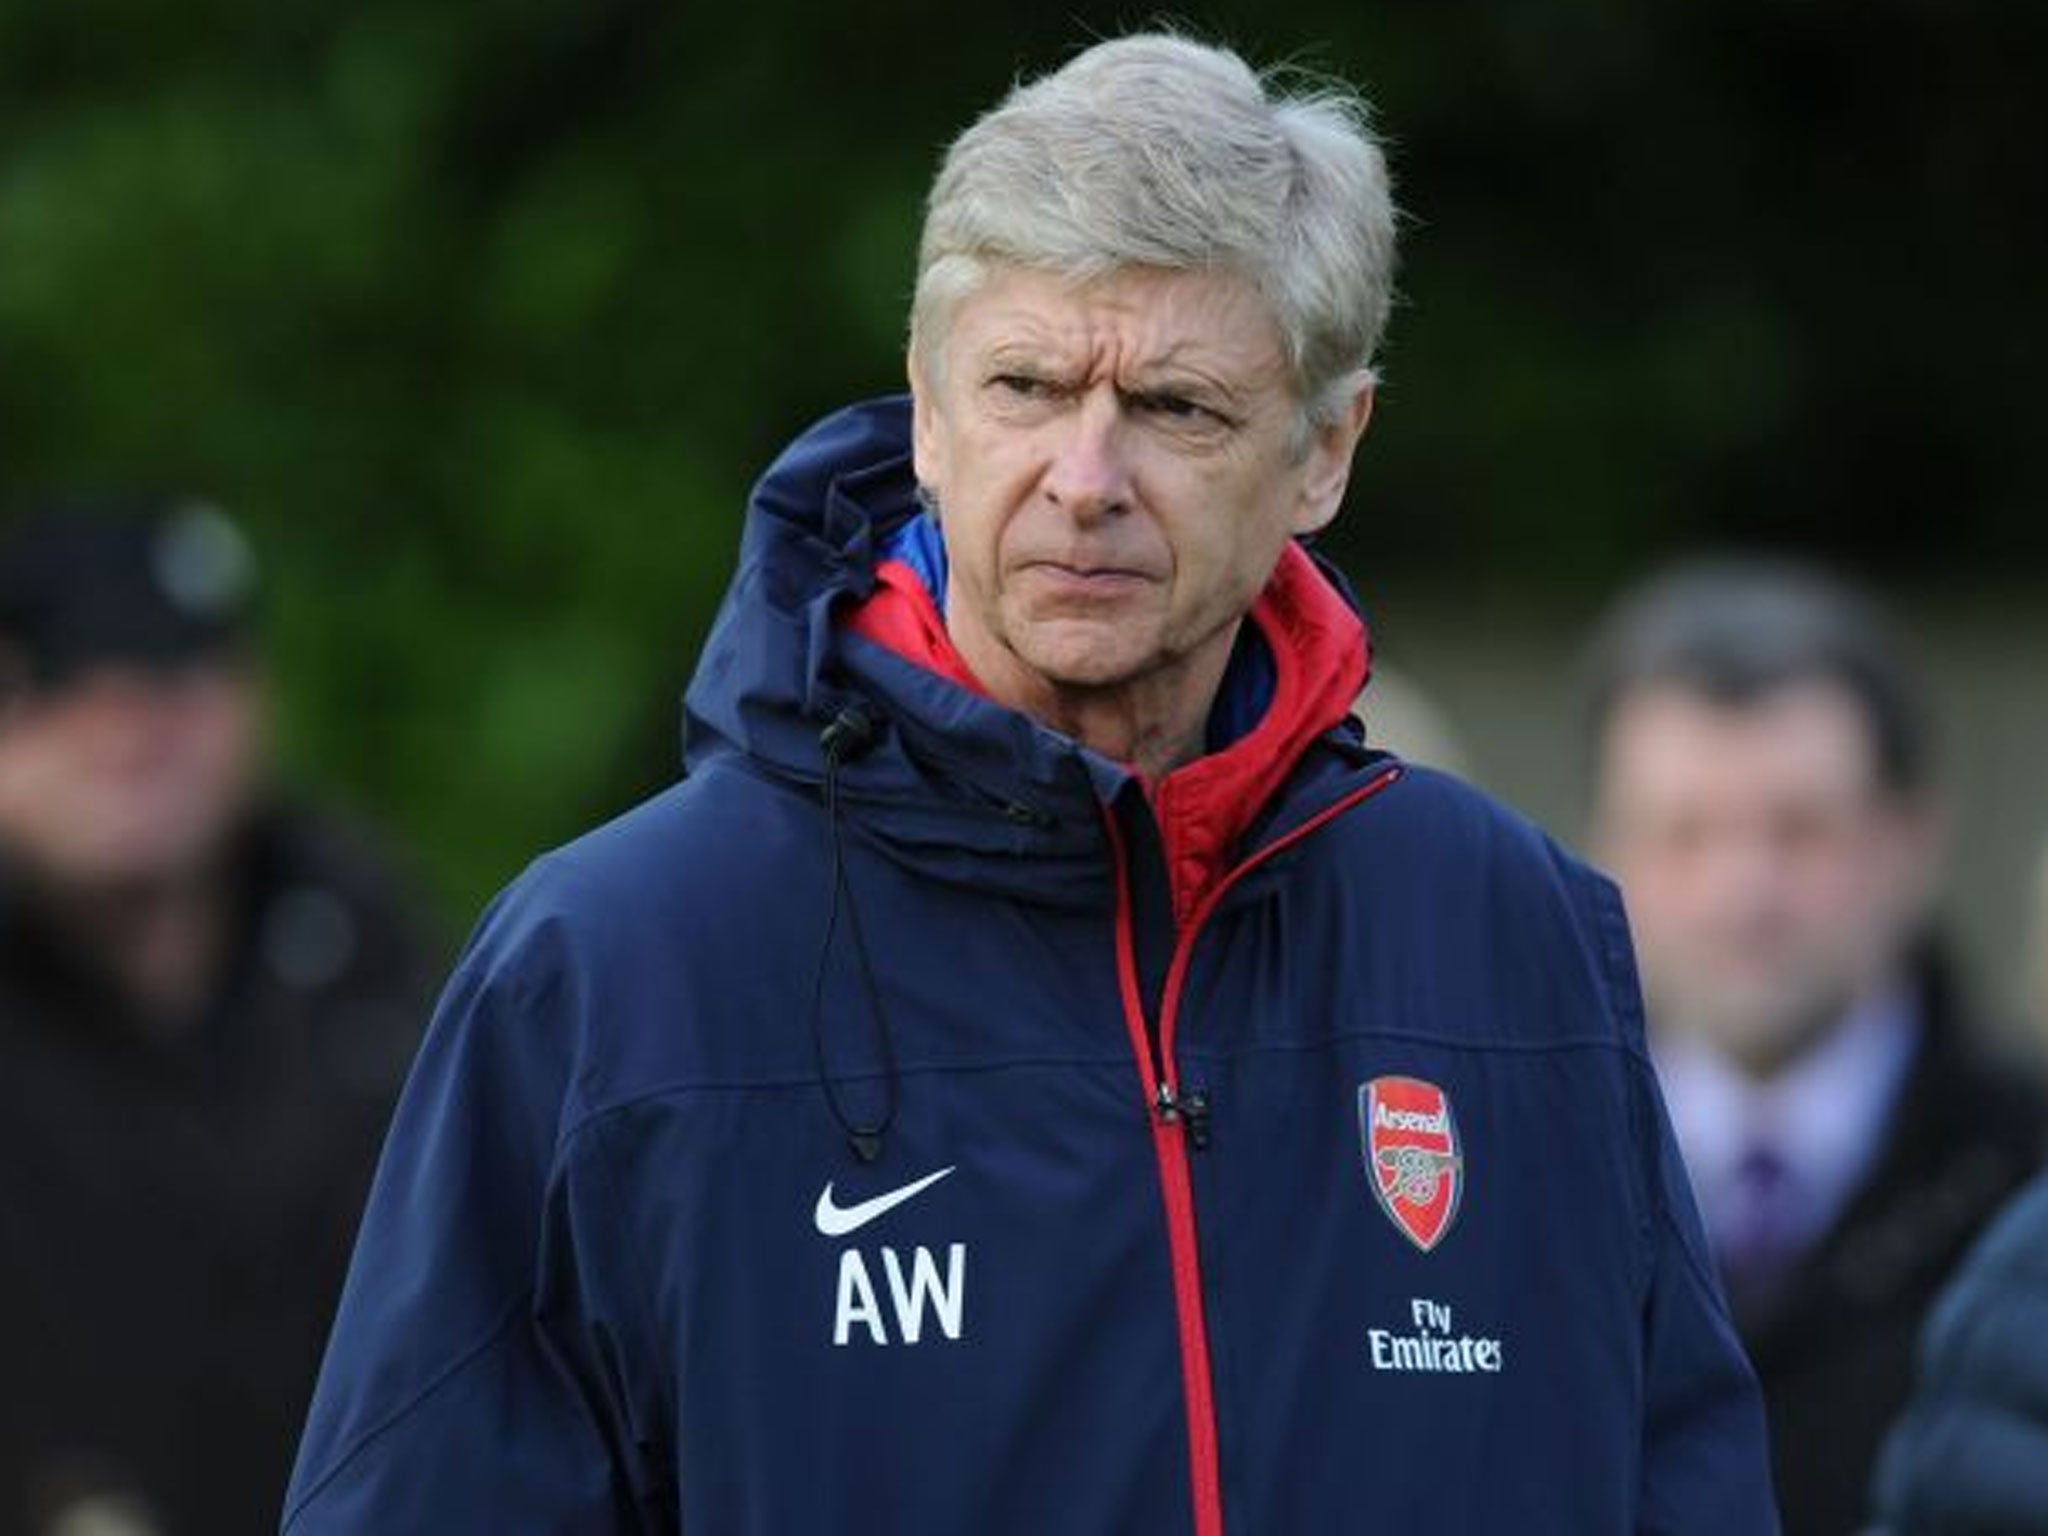 Arsène Wenger is preparing for his 1,000th game at Arsenal